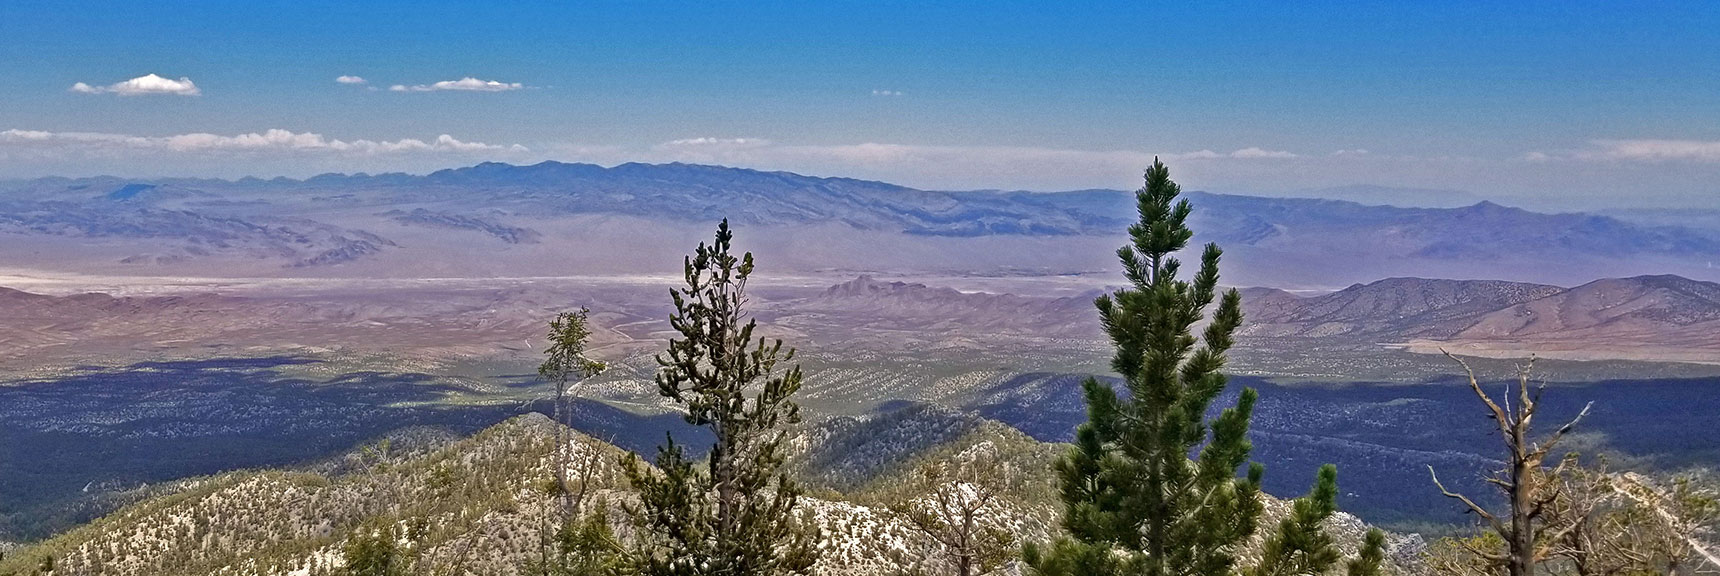 Sheep Range and Gass Peak from the North Side of Black Rock Sister | Black Rock Sister | Mt Charleston Wilderness | Lee Canyon | Spring Mountains, Nevada